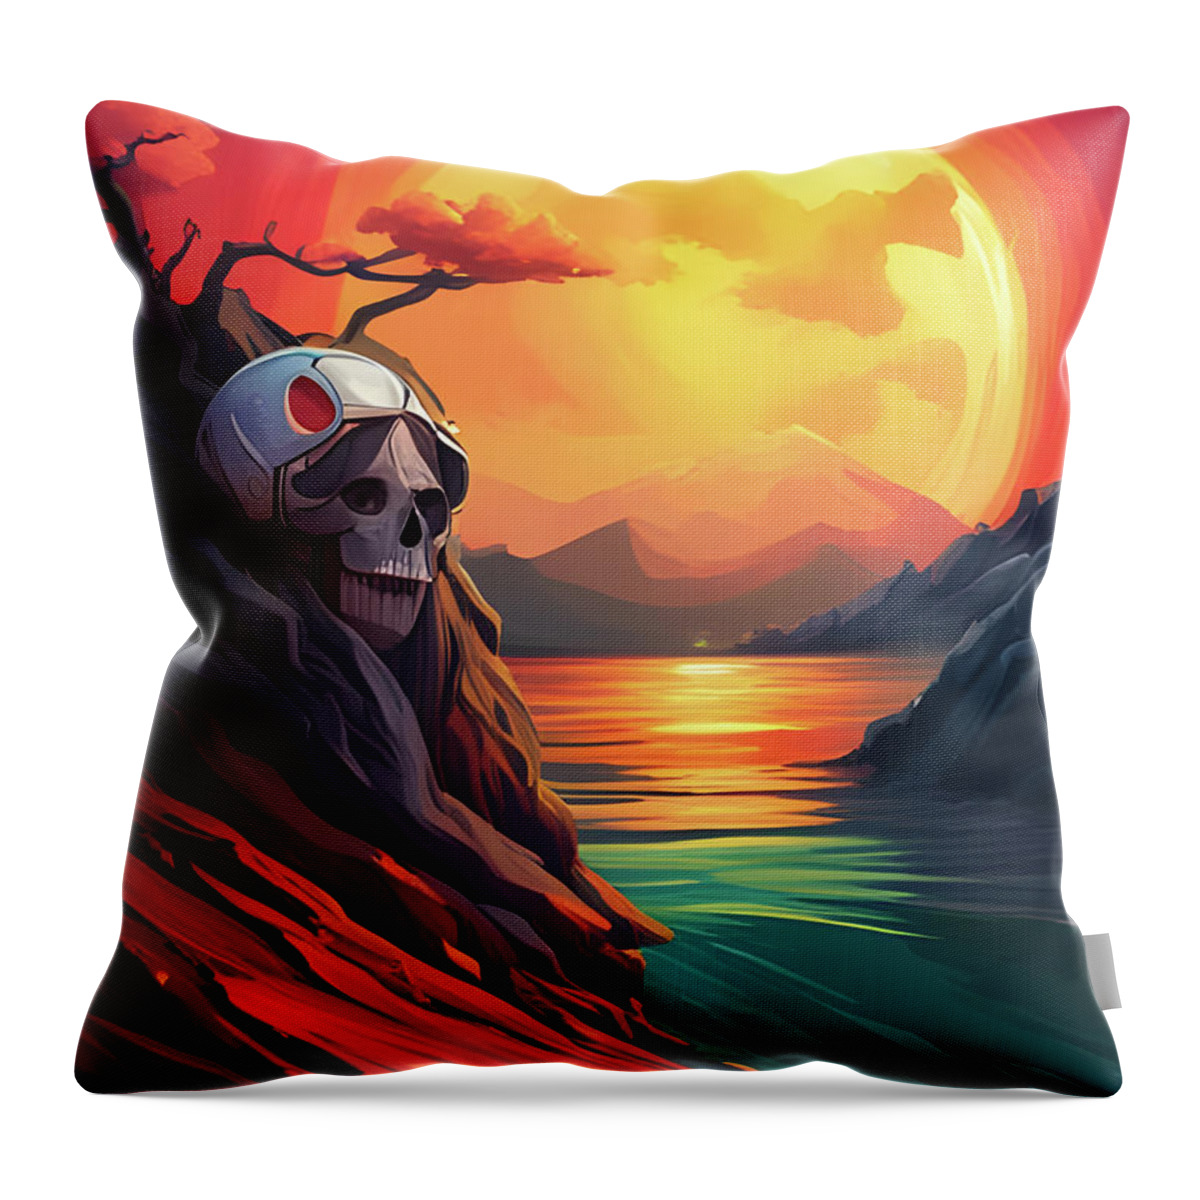 Mountains Throw Pillow featuring the digital art Skull Valley by Jason Denis